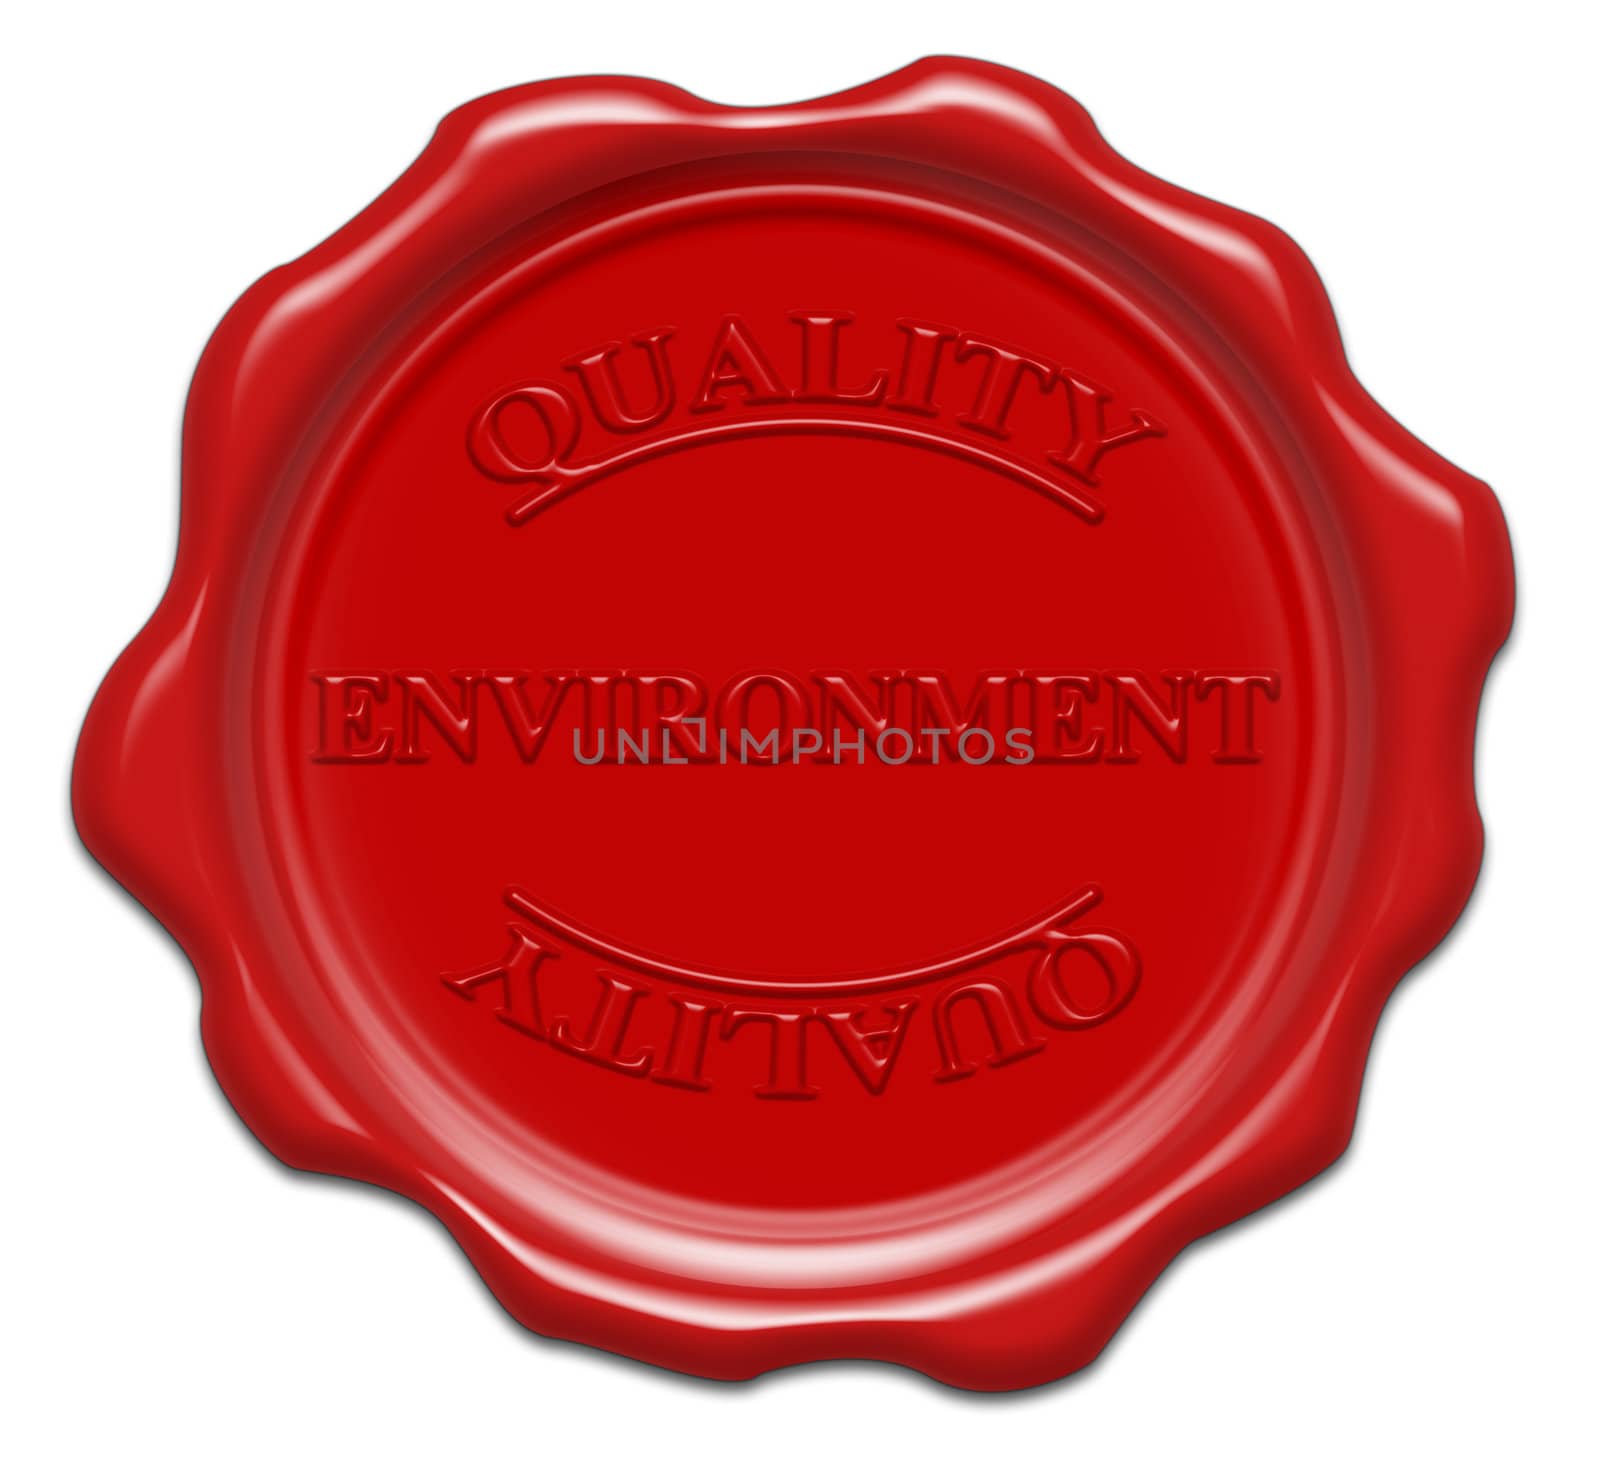 quality environment - illustration red wax seal isolated on white background with word : environment